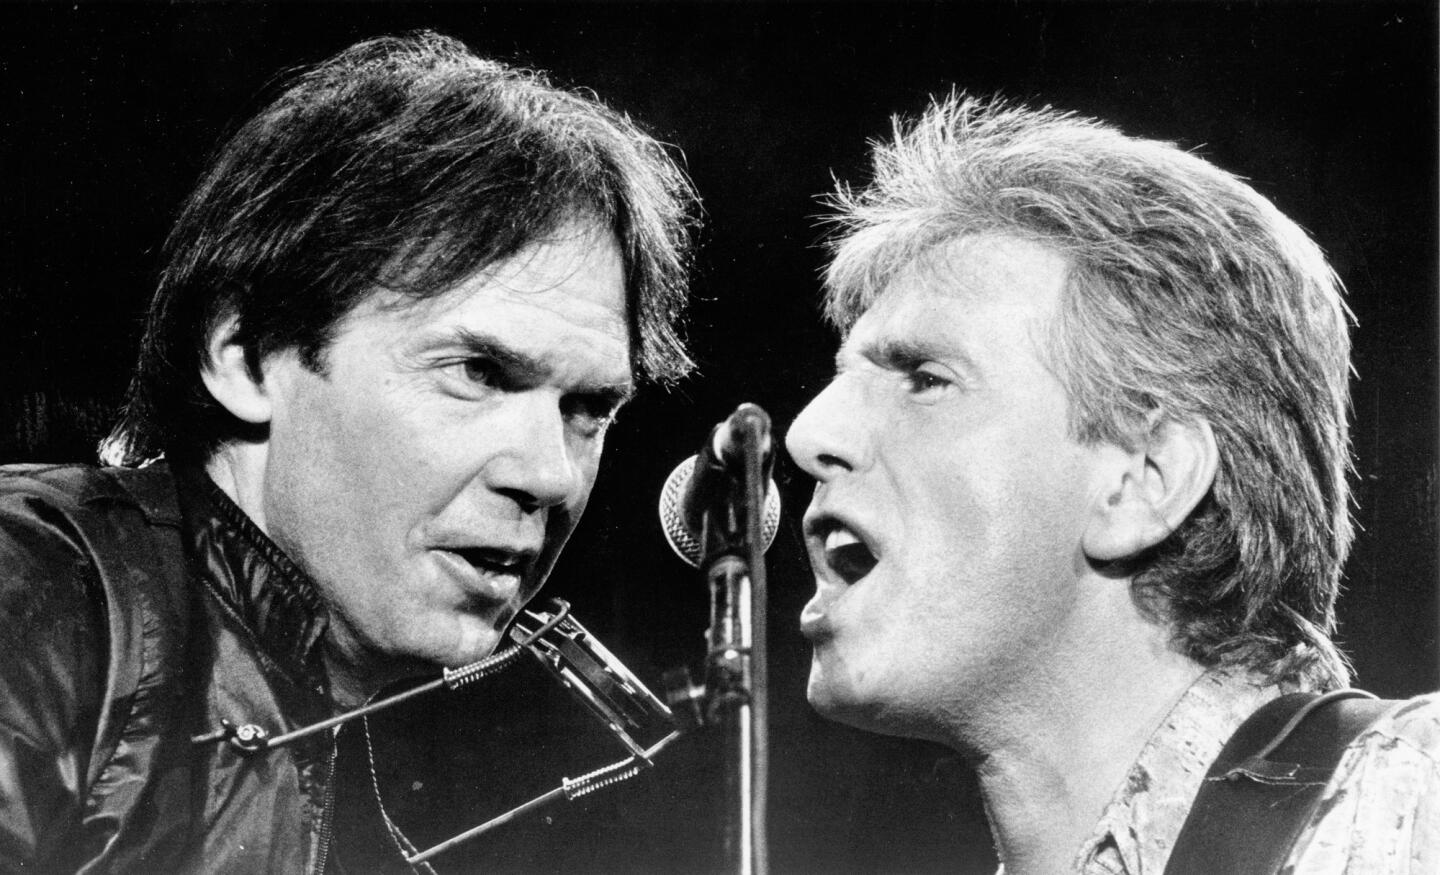 Neil Young, left, and Graham Nash at the Welcome Home Vets concert, Feb. 24, 1986.